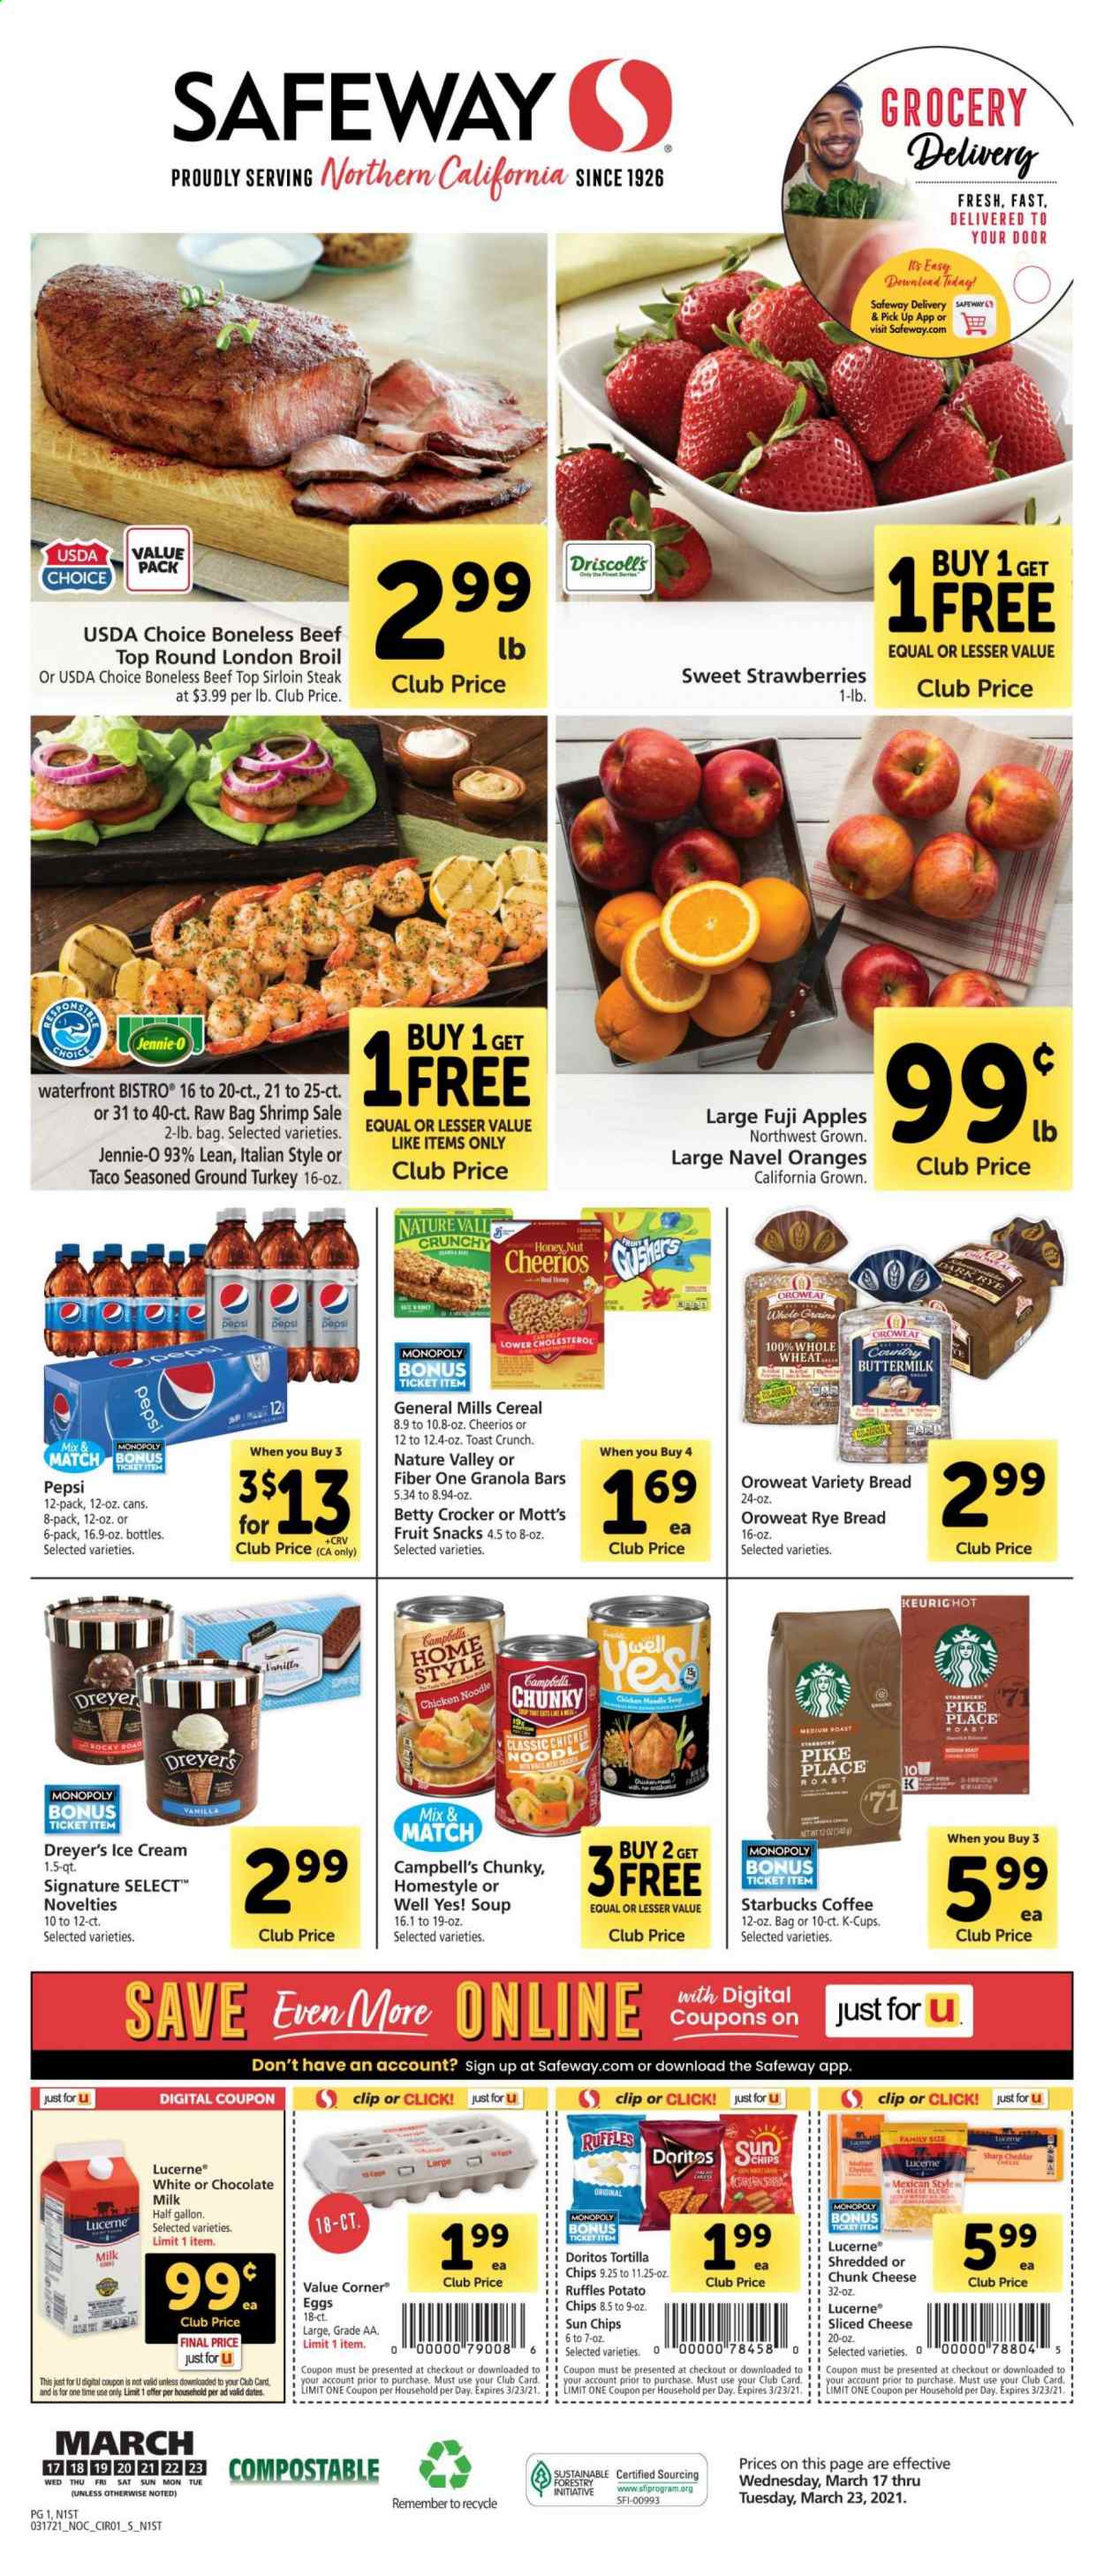 thumbnail - Safeway Flyer - 03/17/2021 - 03/23/2021 - Sales products - Fuji apple, bread, tortillas, toast bread, apples, oranges, ground turkey, beef sirloin, steak, sirloin steak, shrimps, Campbell's, soup, sliced cheese, cheese, chunk cheese, buttermilk, eggs, ice cream, strawberries, chocolate, fruit snack, Doritos, potato chips, chips, Ruffles, cereals, Cheerios, granola bar, Nature Valley, Fiber One, noodles, dried dates, Pepsi, Mott's, coffee, Starbucks, coffee capsules, K-Cups, Sharp. Page 1.